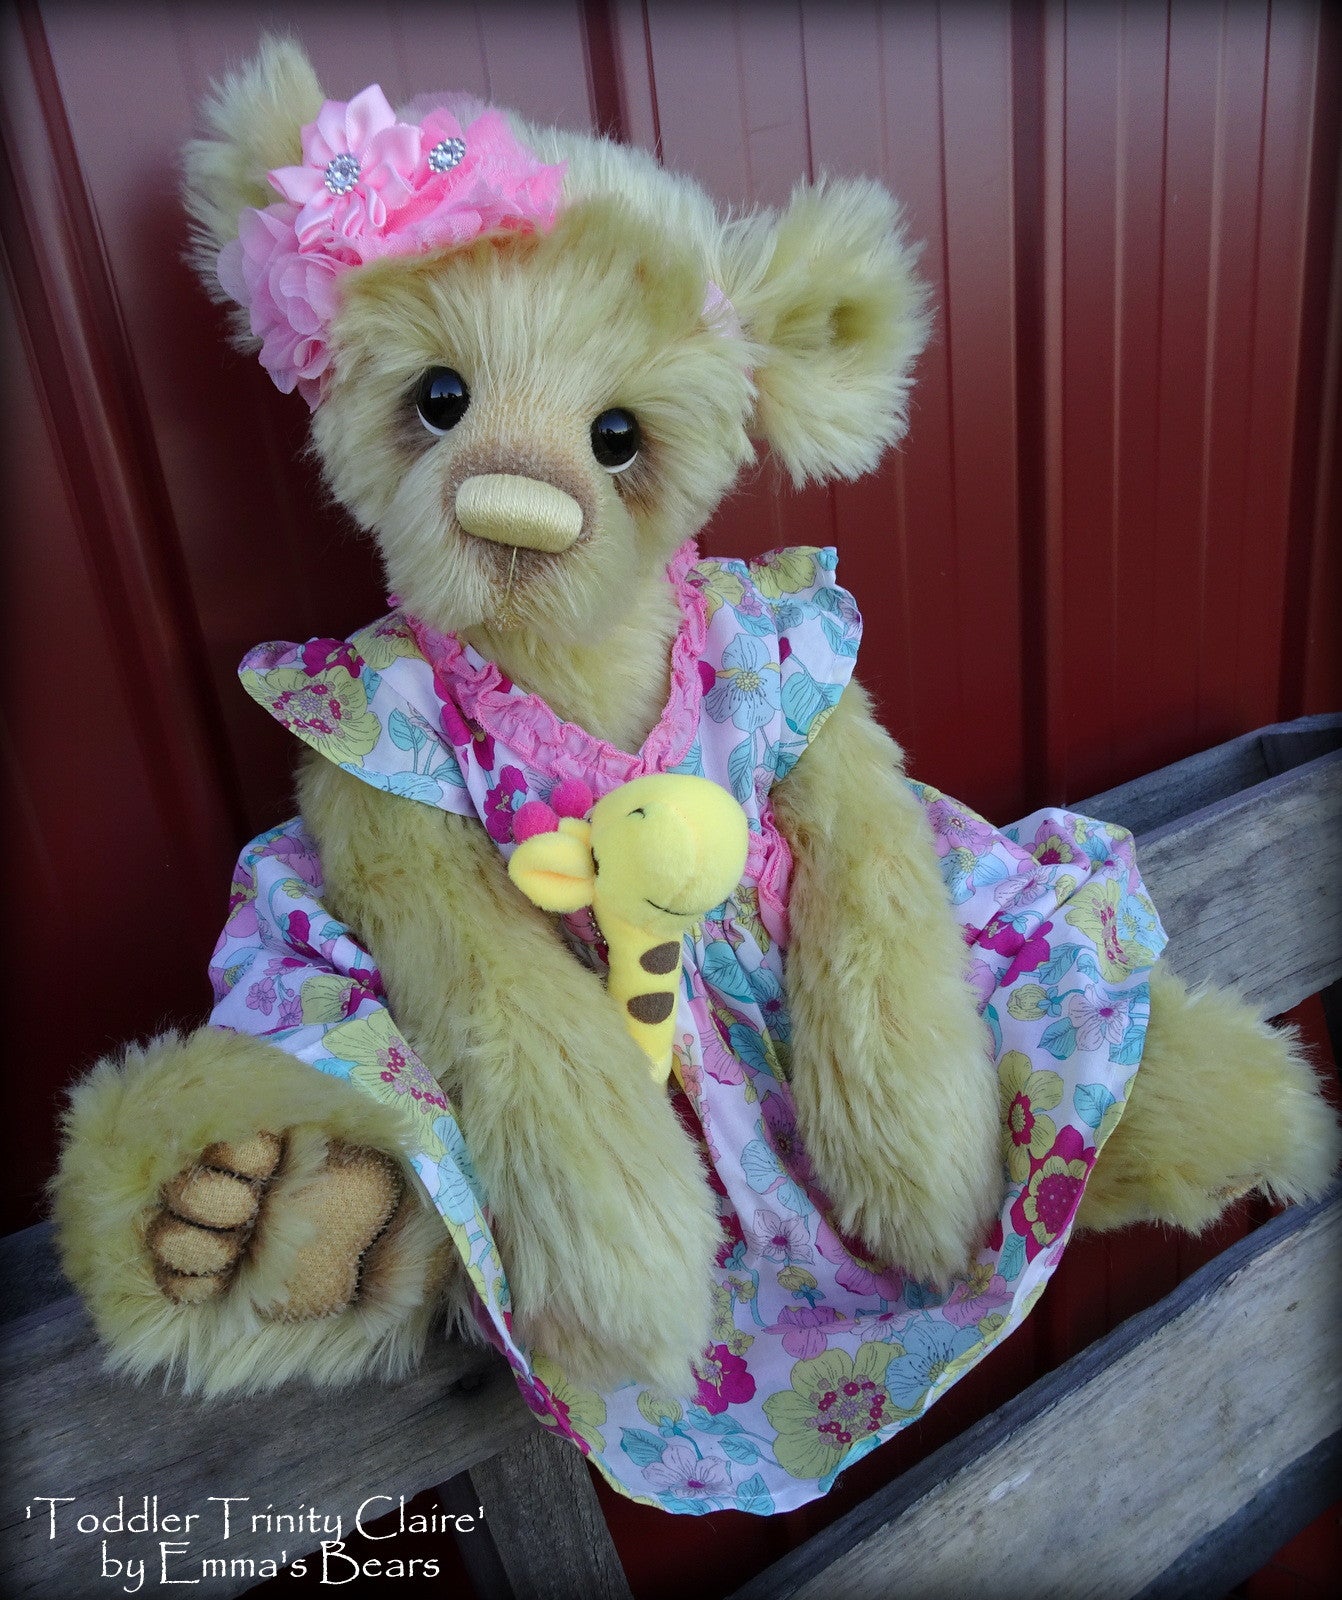 Toddler Trinity Claire - 20in MOHAIR Artist toddler style Bear by Emmas Bears - OOAK